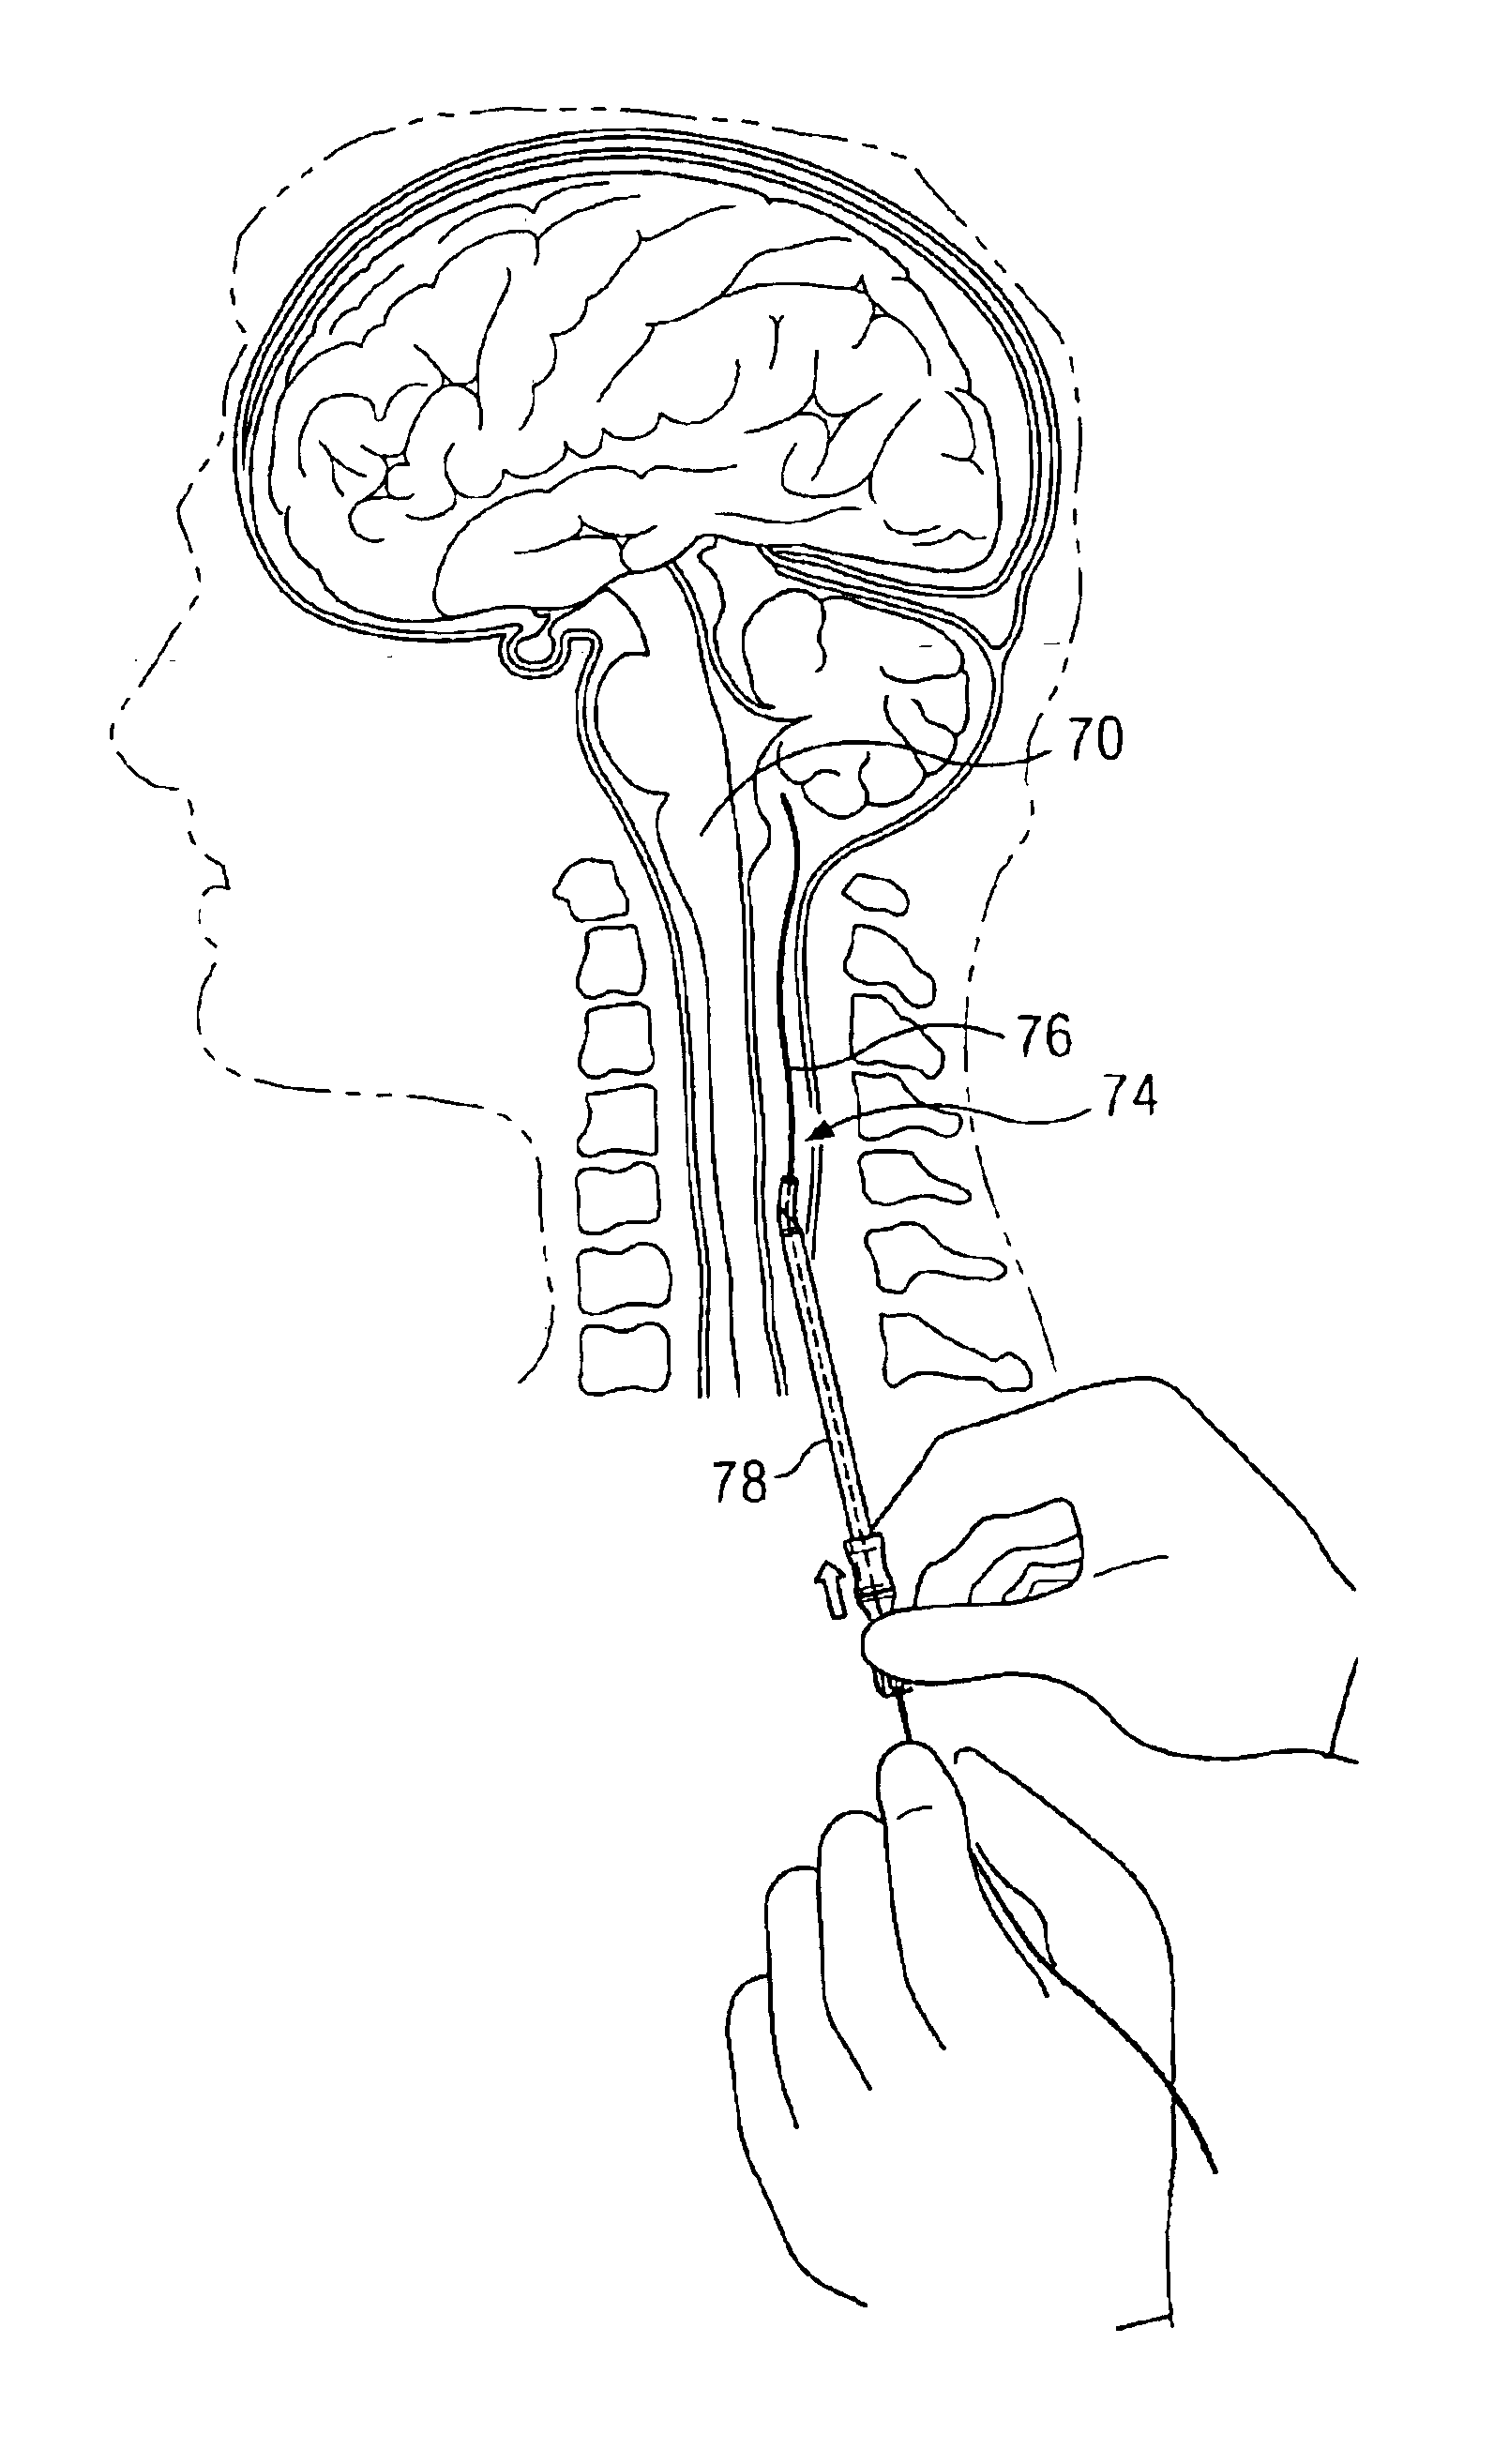 System and method for stimulation of a person's brain stem